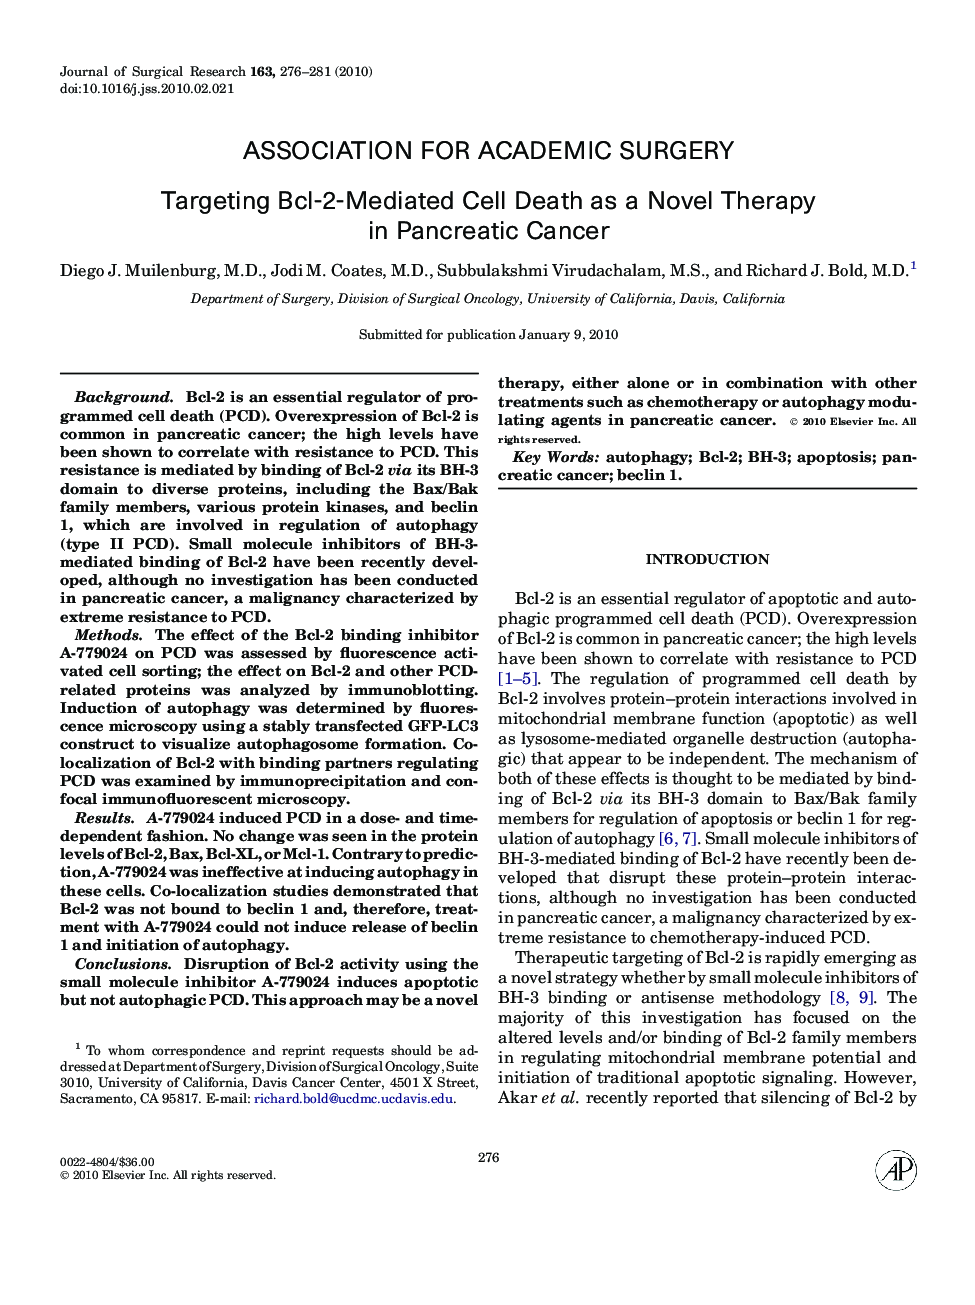 Targeting Bcl-2-Mediated Cell Death as a Novel Therapy in Pancreatic Cancer